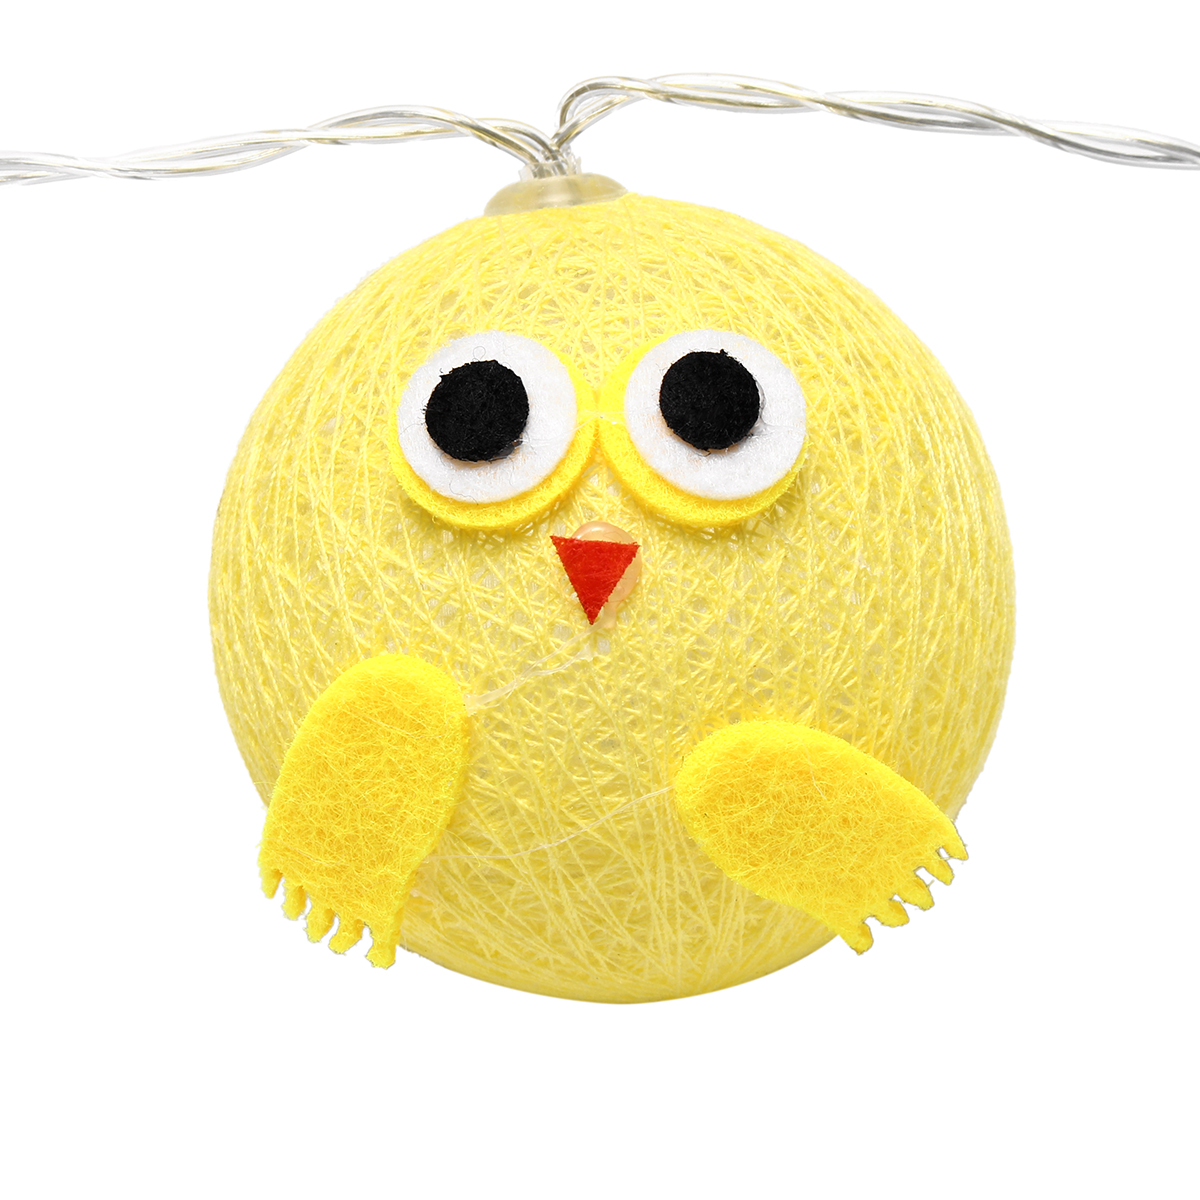 101520-Chicken-Cotton-Fairy-String-Light-Birthday-Party-Kids-Bedroom-Decorations-1640768-1